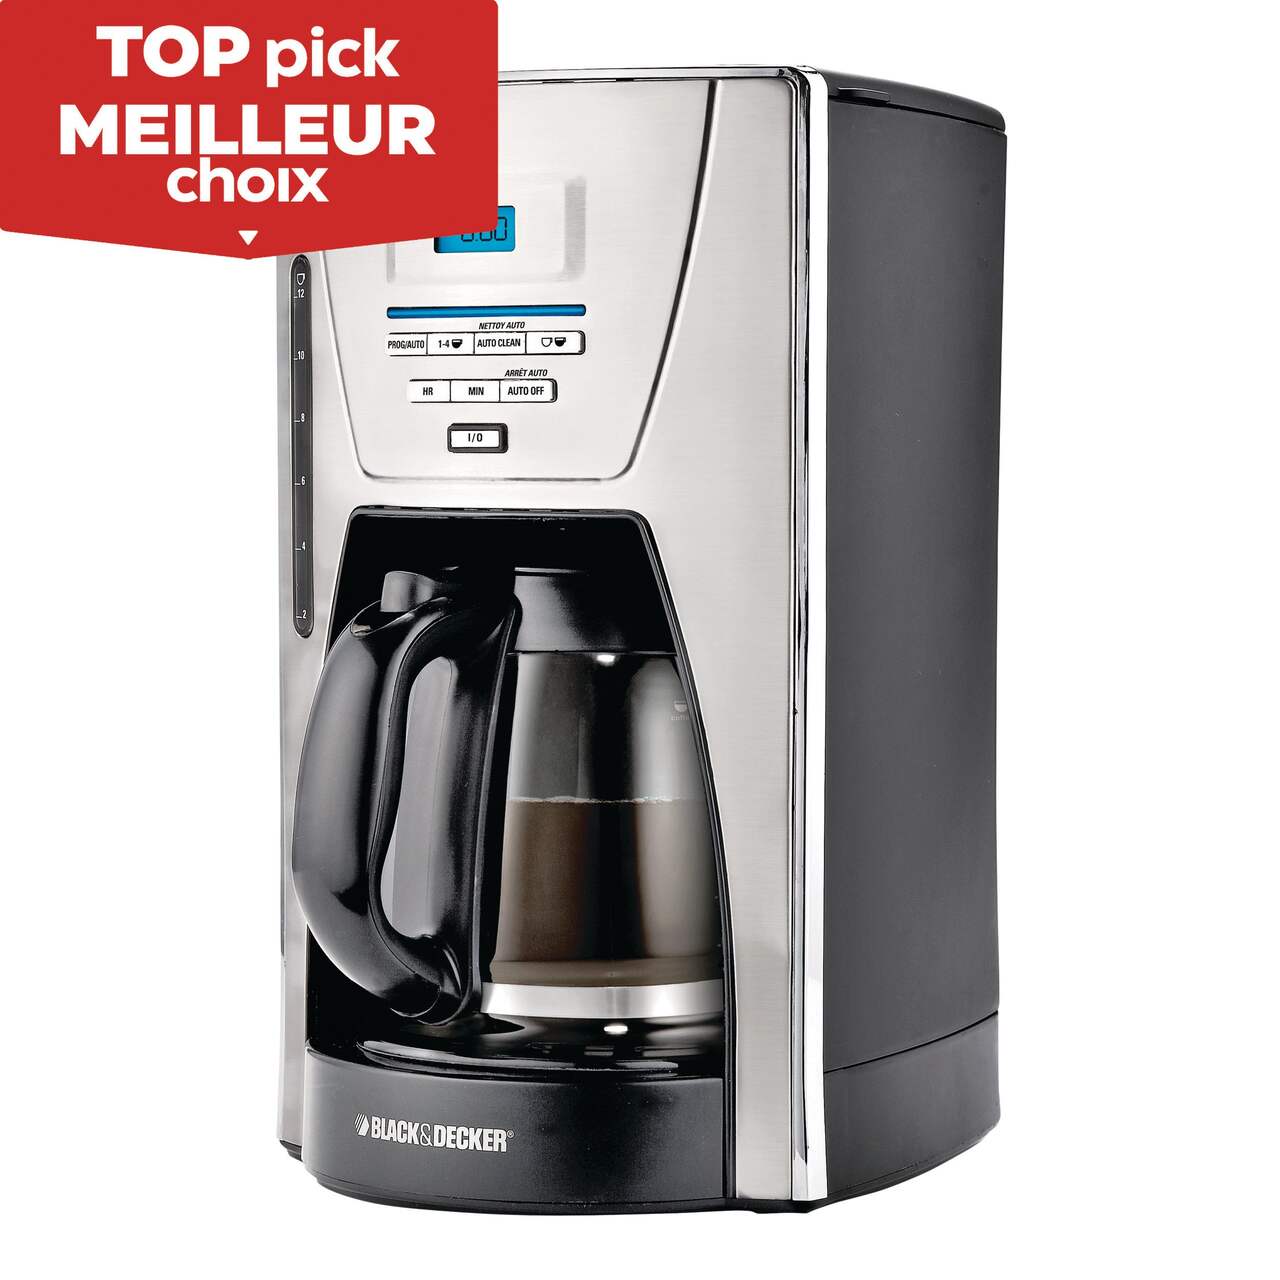 https://media-www.canadiantire.ca/product/living/kitchen/kitchen-appliances/0430421/b-d12-cup-glass-coffee-maker-w-stainless-steel-accents-4b669b6c-6a01-4994-8f31-dcea3c5211db-jpgrendition.jpg?imdensity=1&imwidth=640&impolicy=mZoom